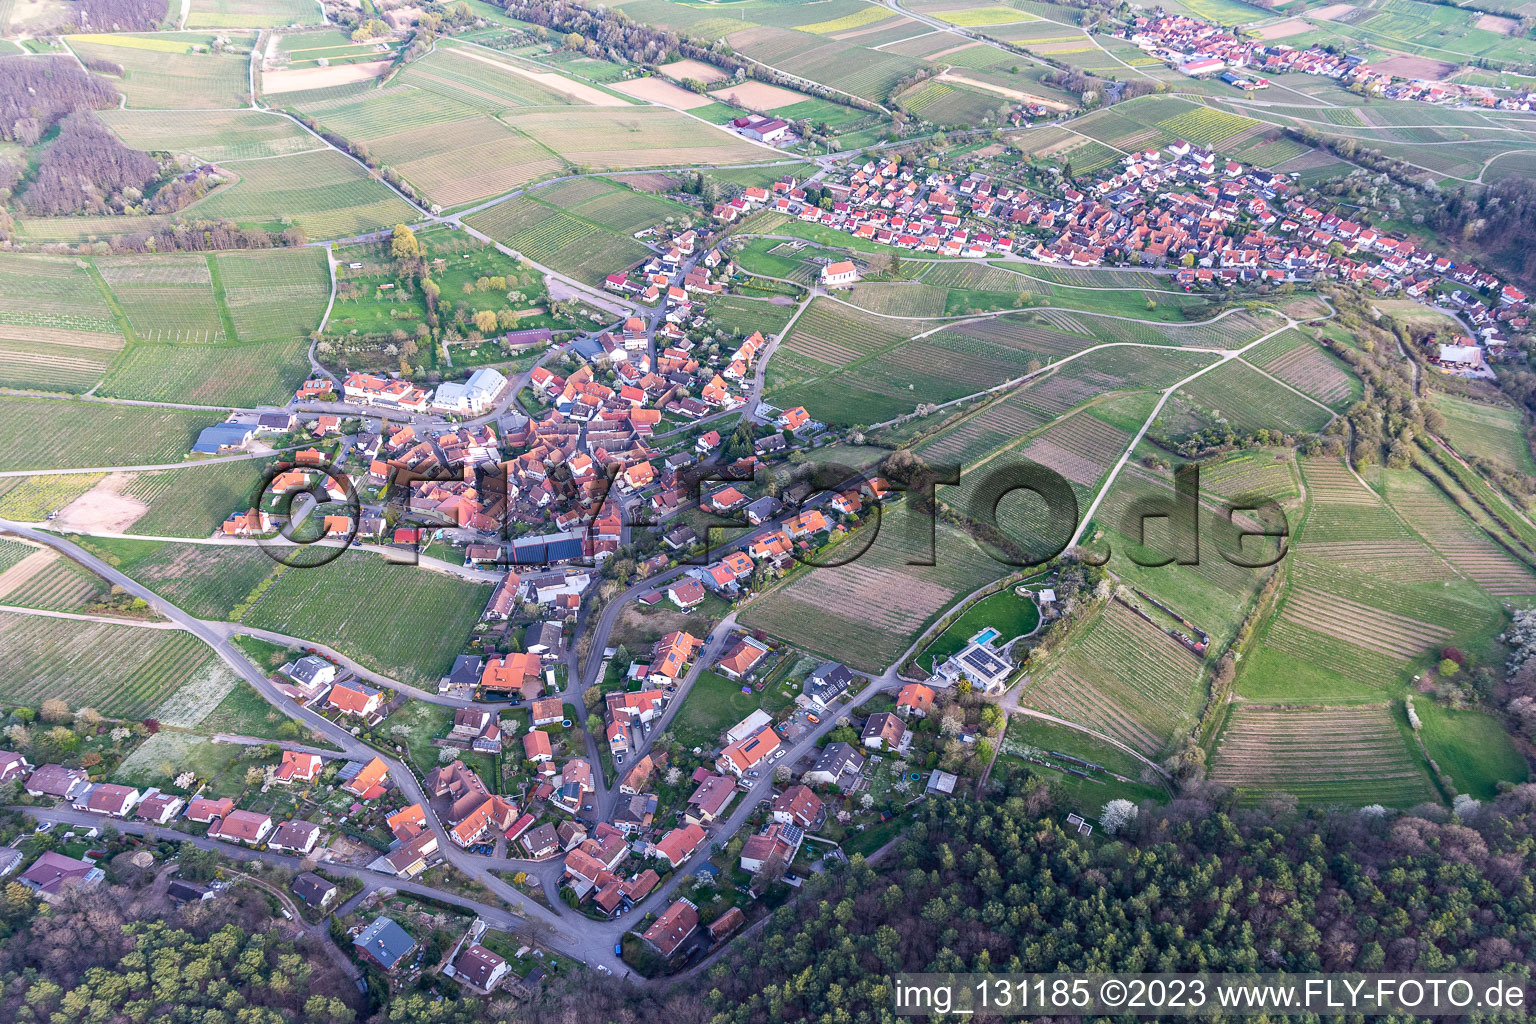 District Gleiszellen in Gleiszellen-Gleishorbach in the state Rhineland-Palatinate, Germany from a drone